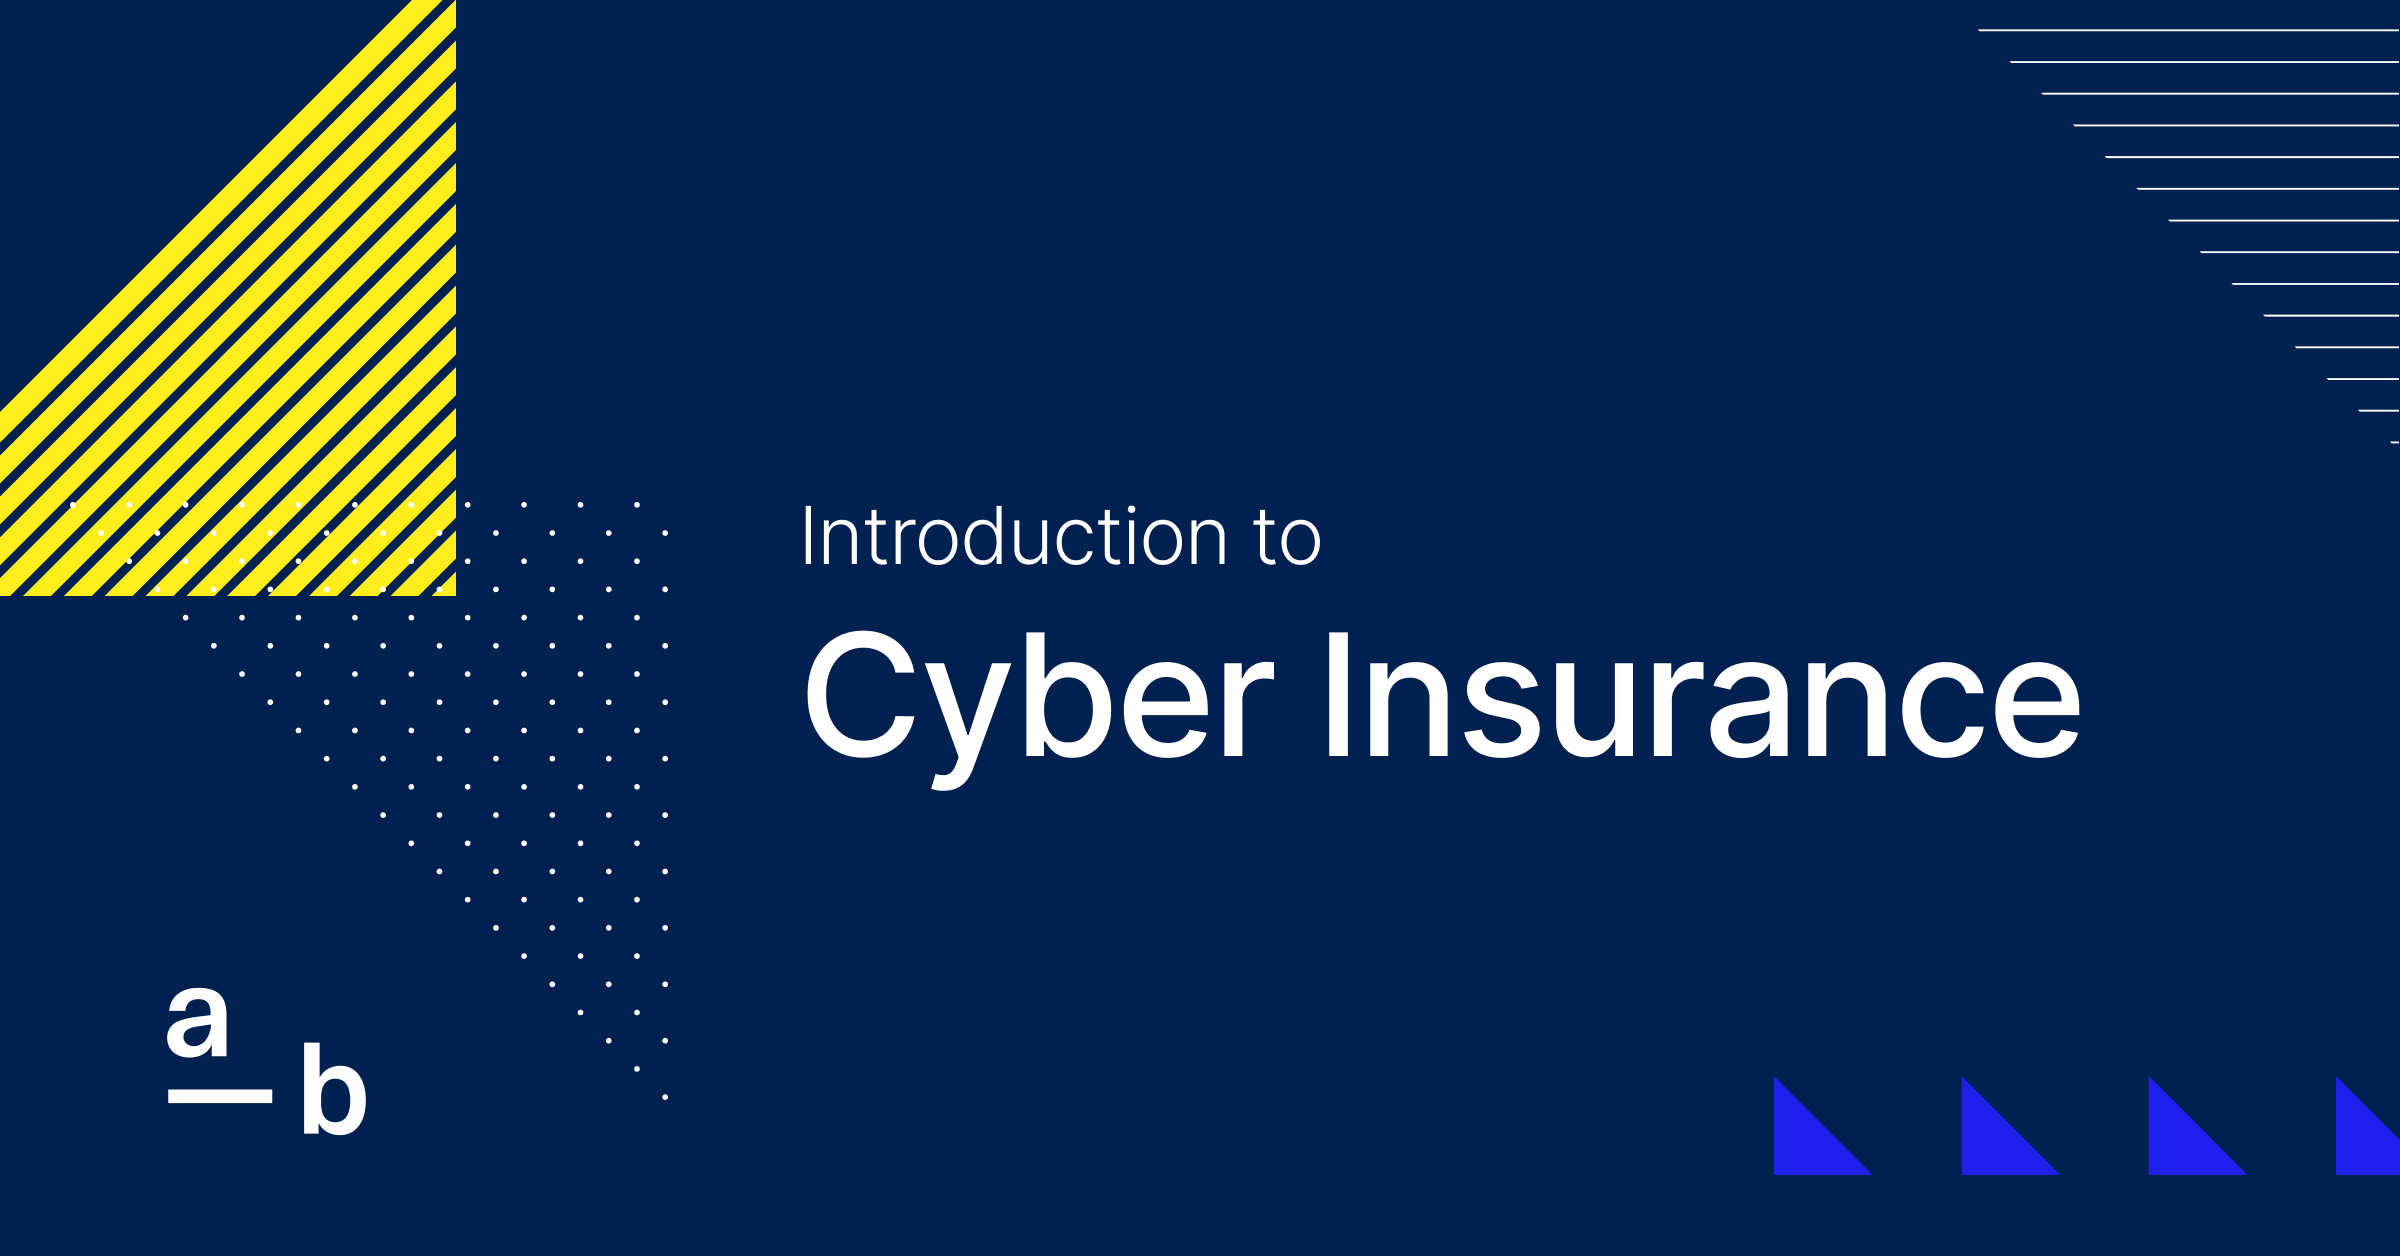 Introduction to Cyber Insurance